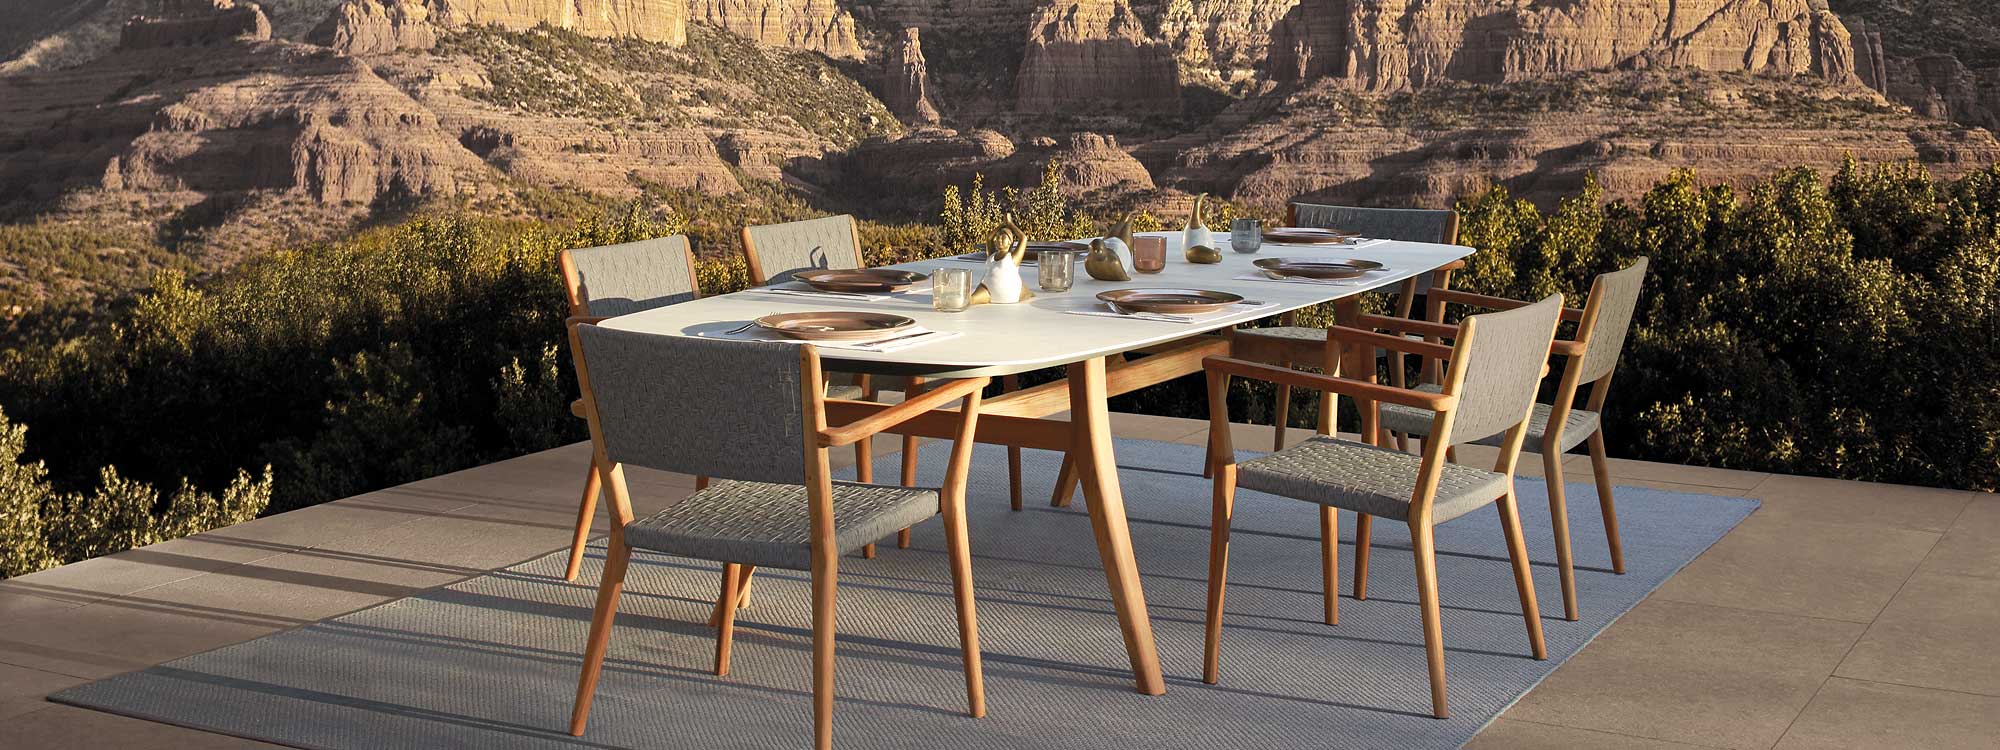 Image of Royal Botania dining furniture placed on a grey outdoor rug